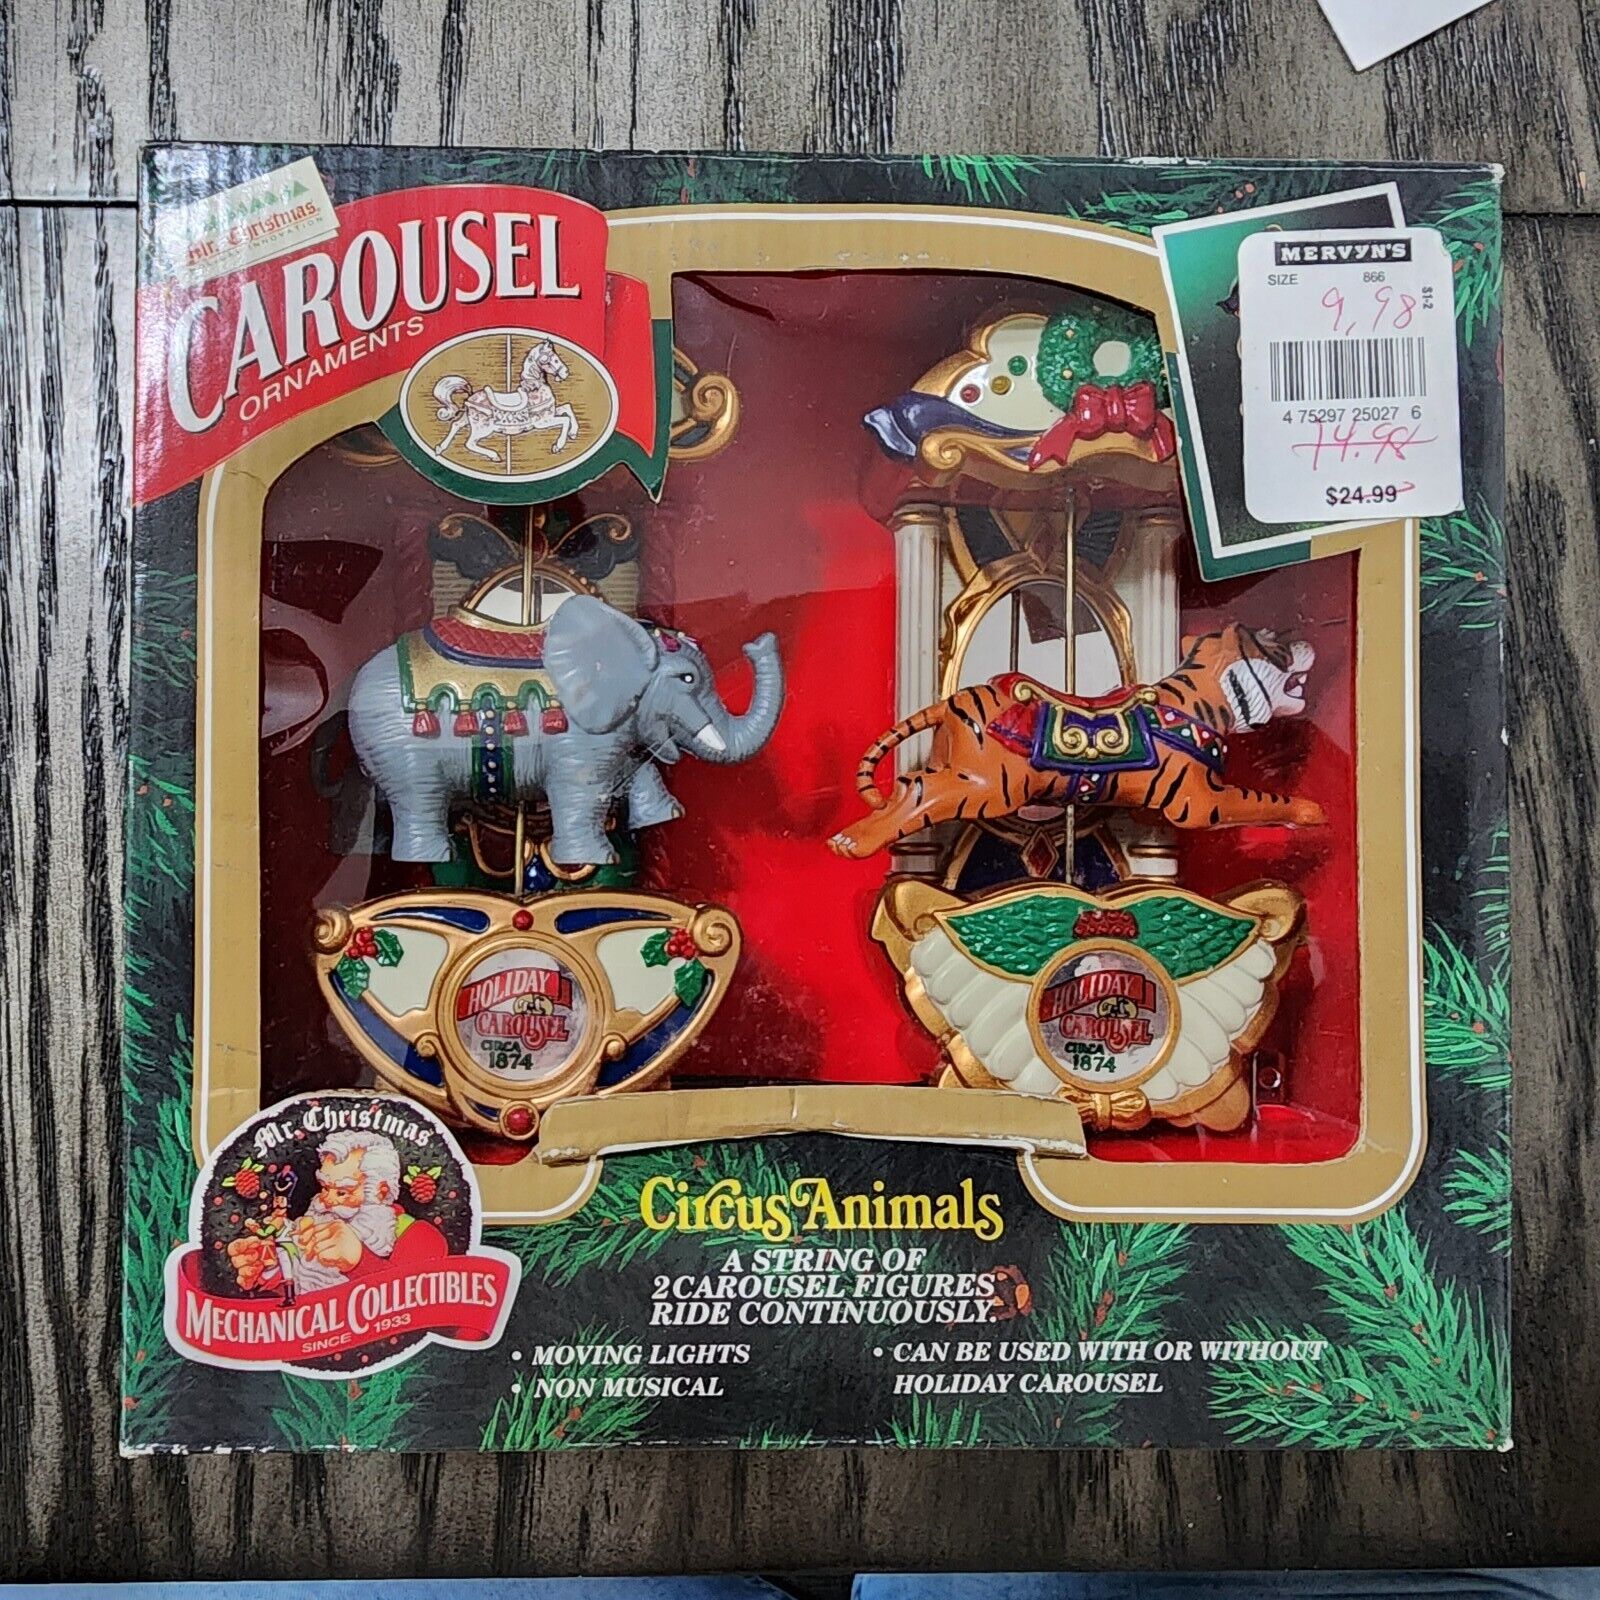 VTG Mr. Christmas Mechanical Collectibles Carousel Ornaments Circus Animals NEW